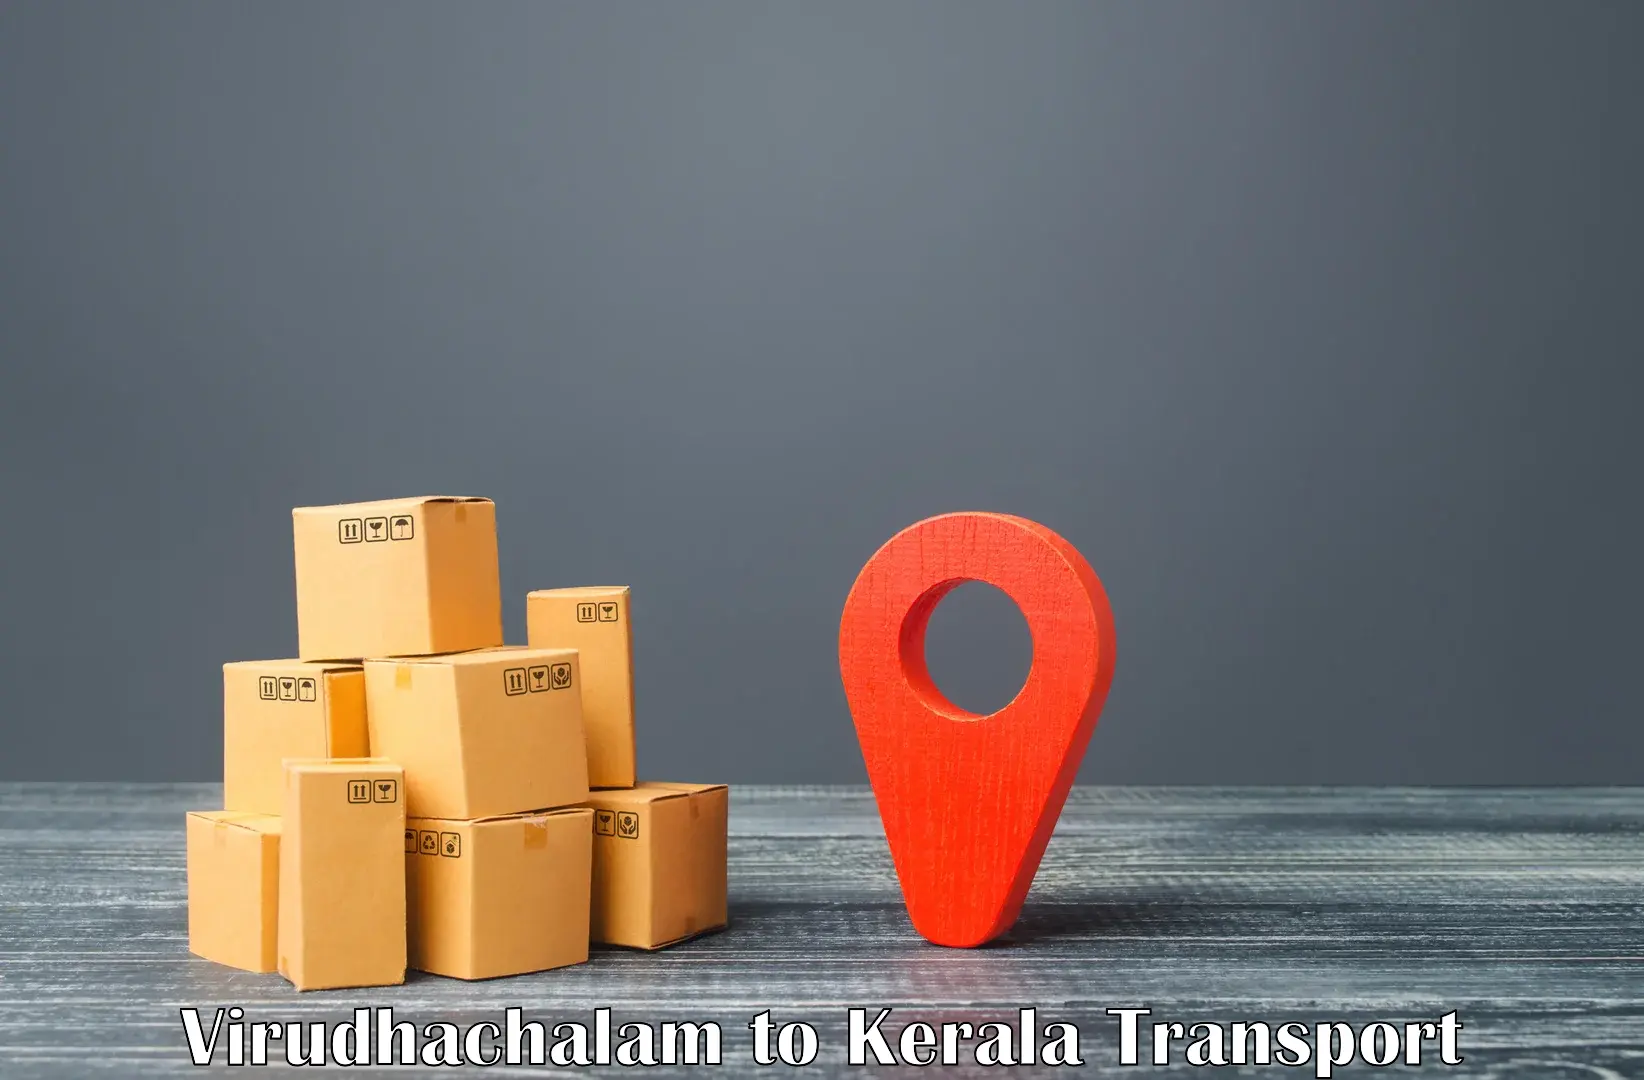 Truck transport companies in India Virudhachalam to Thrissur